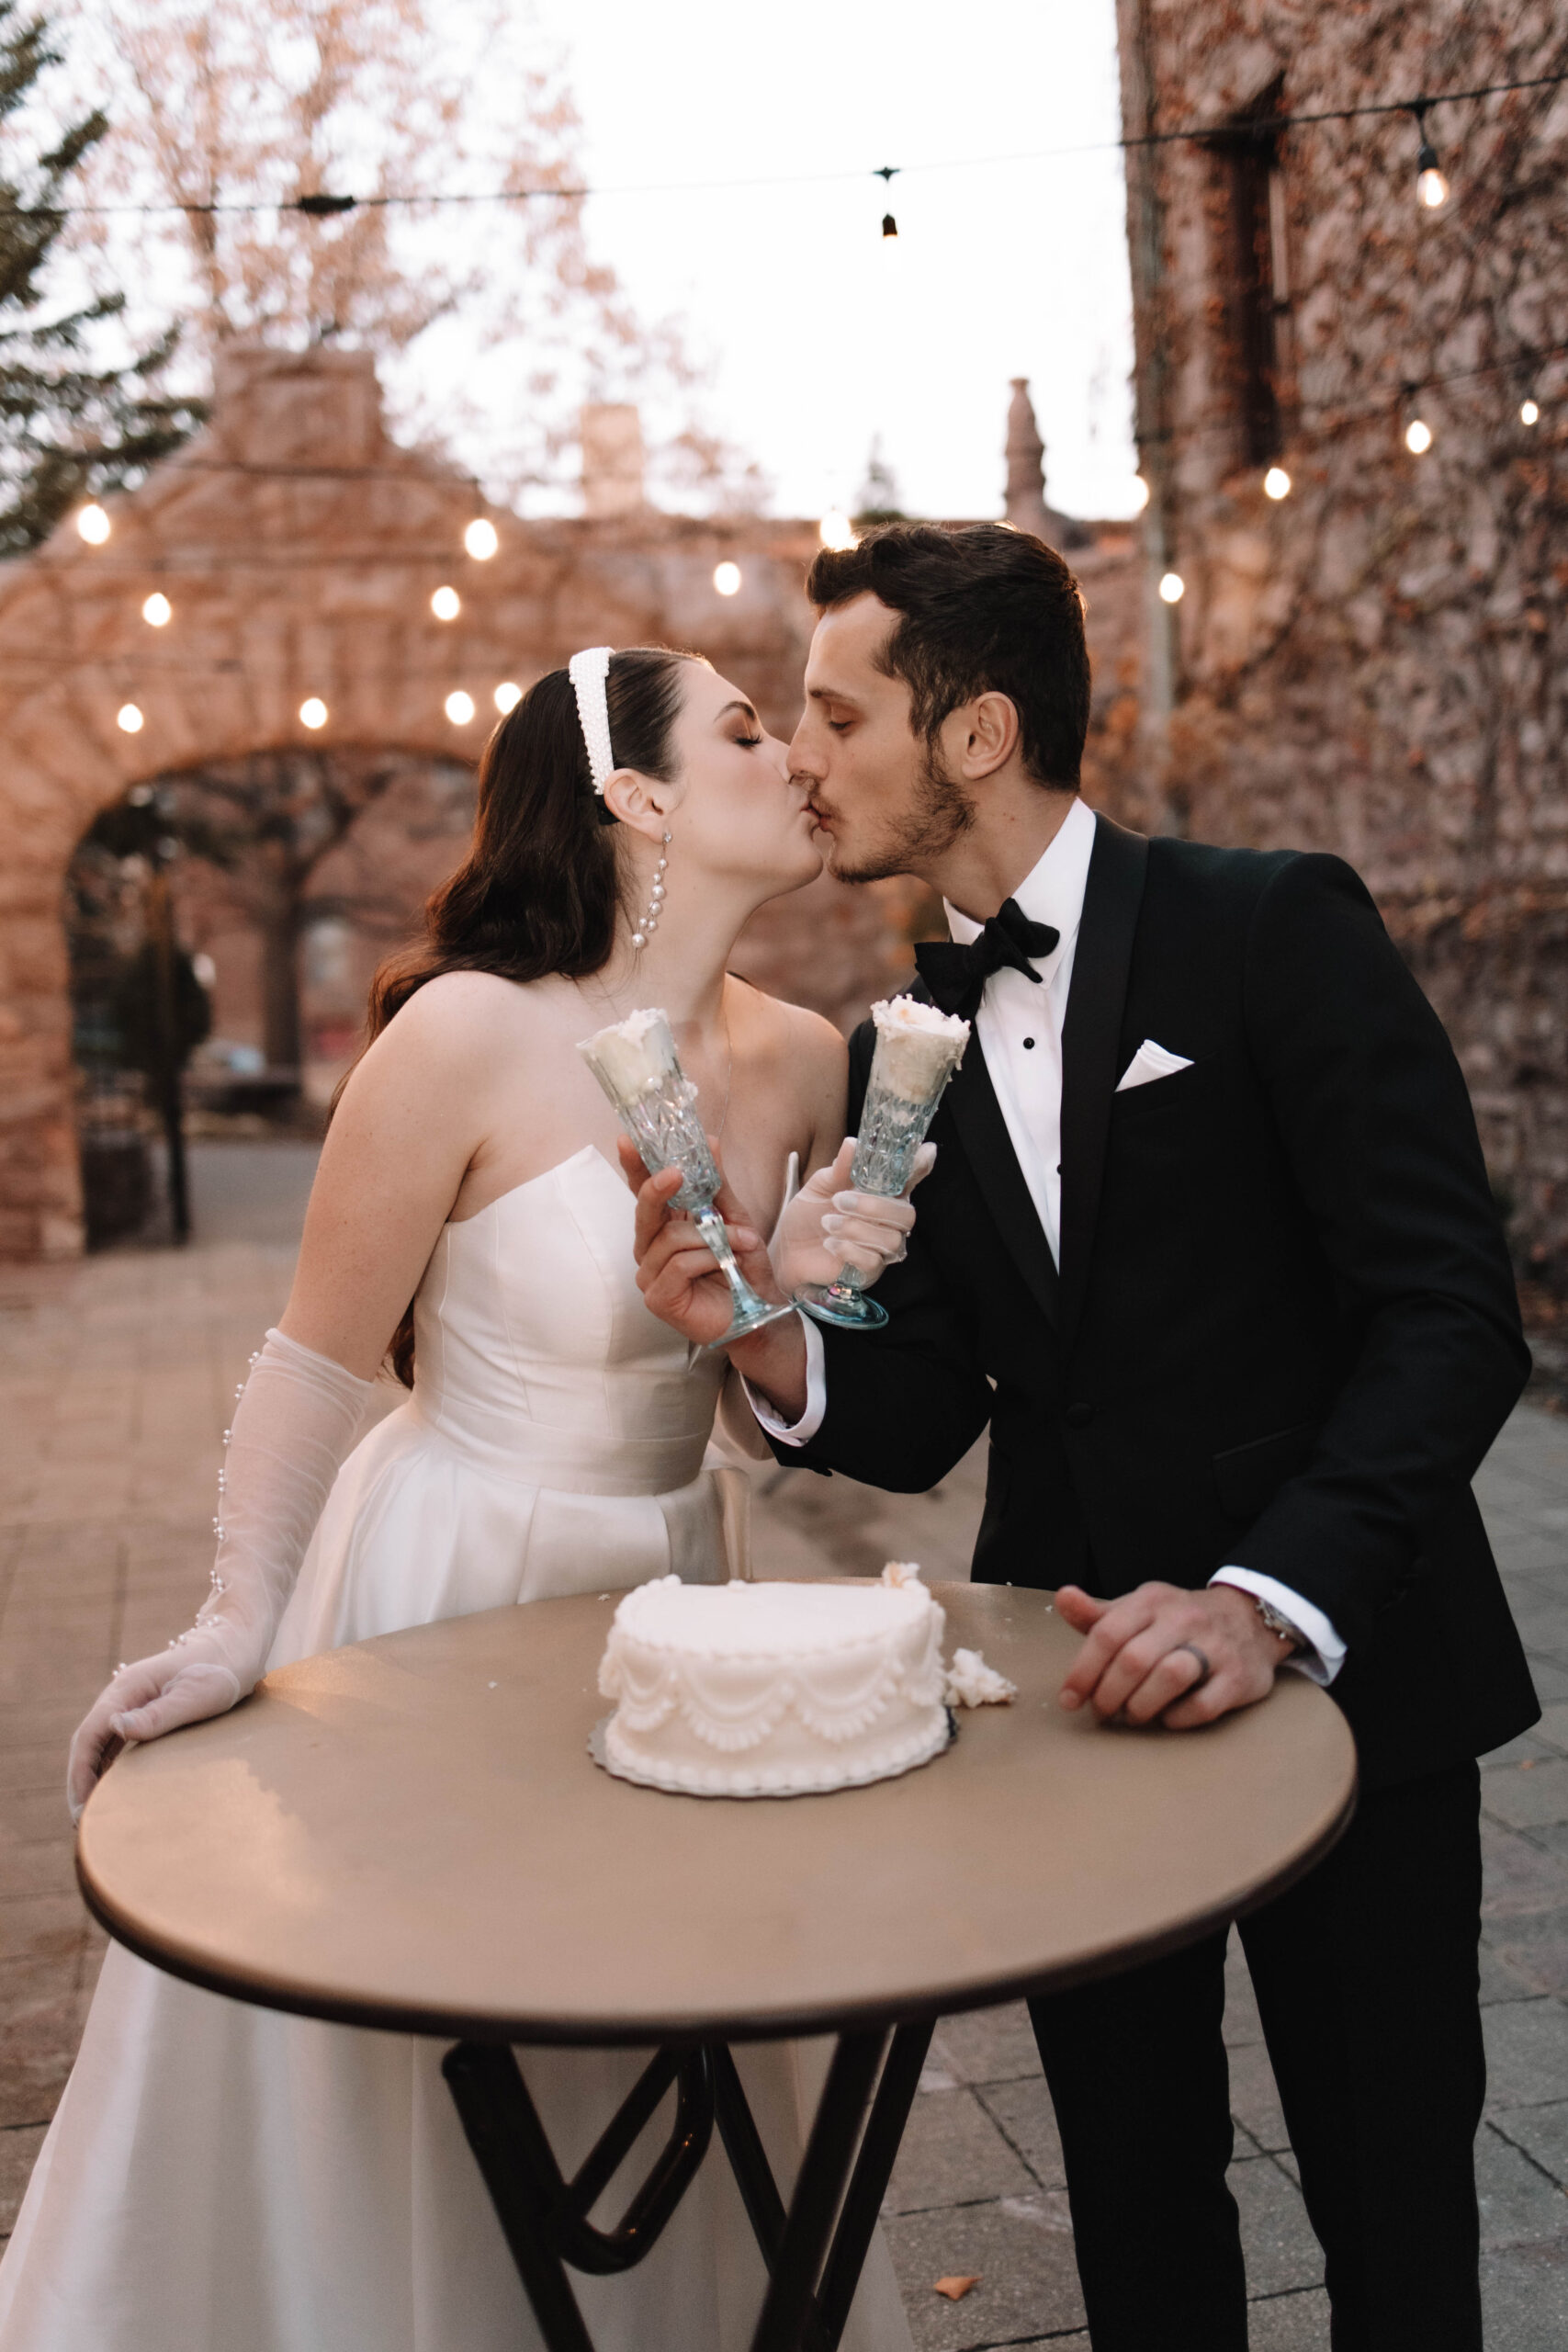 A bride and groom in luxury wedding attire kissing and standing behind their cake table that has a small white wedding cake on